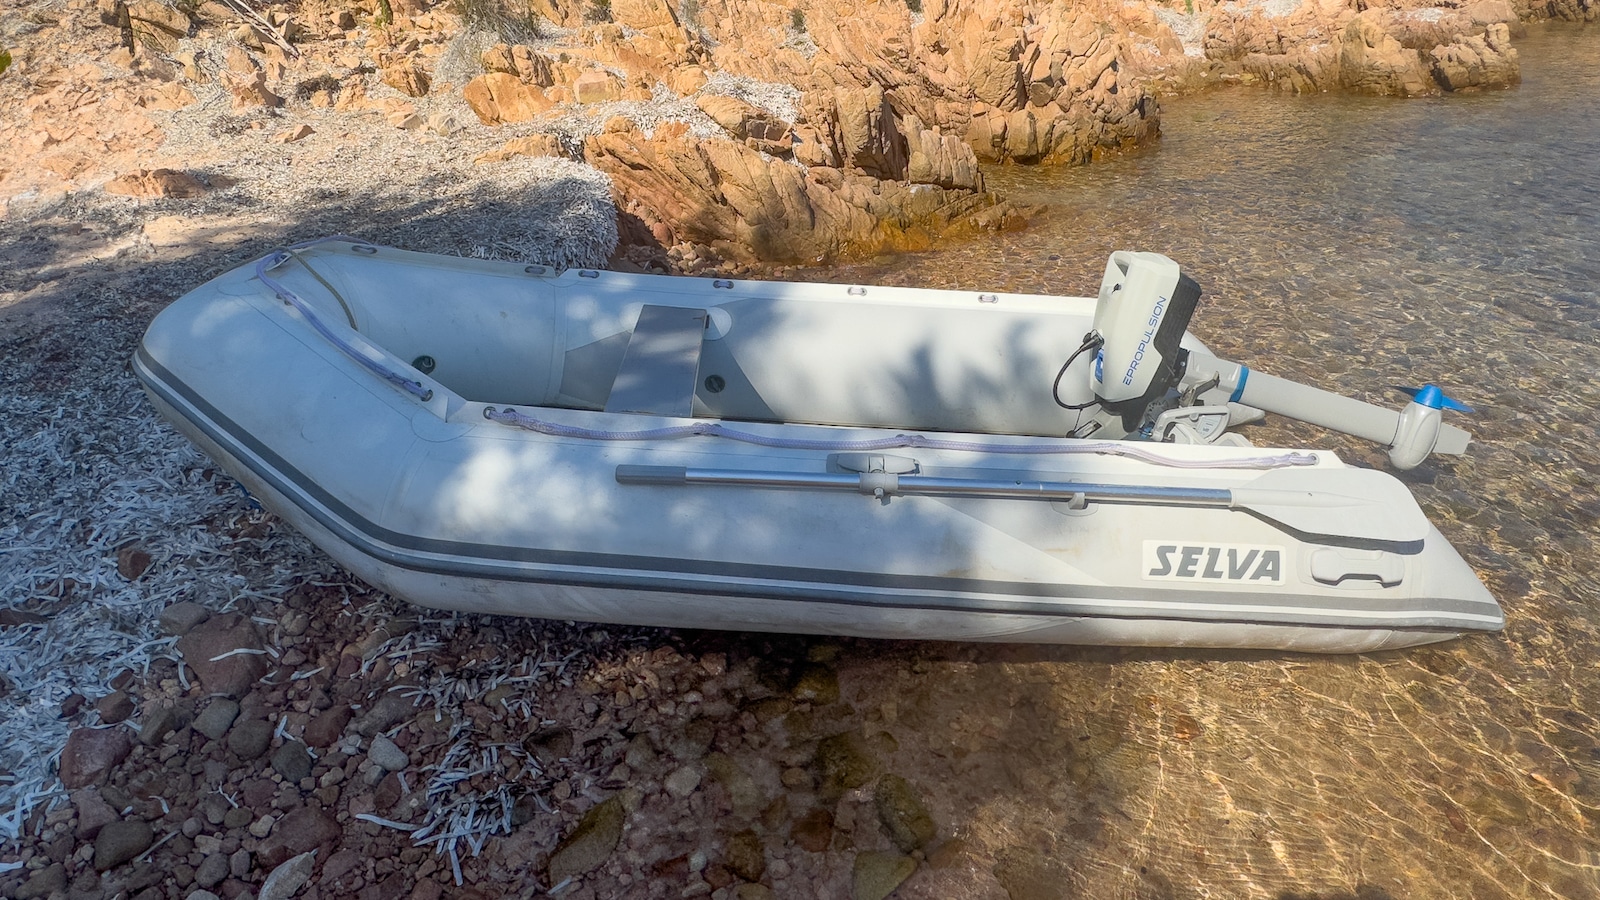 Selva 320 VIB: 5 years of testing for an out-of-the-ordinary tender